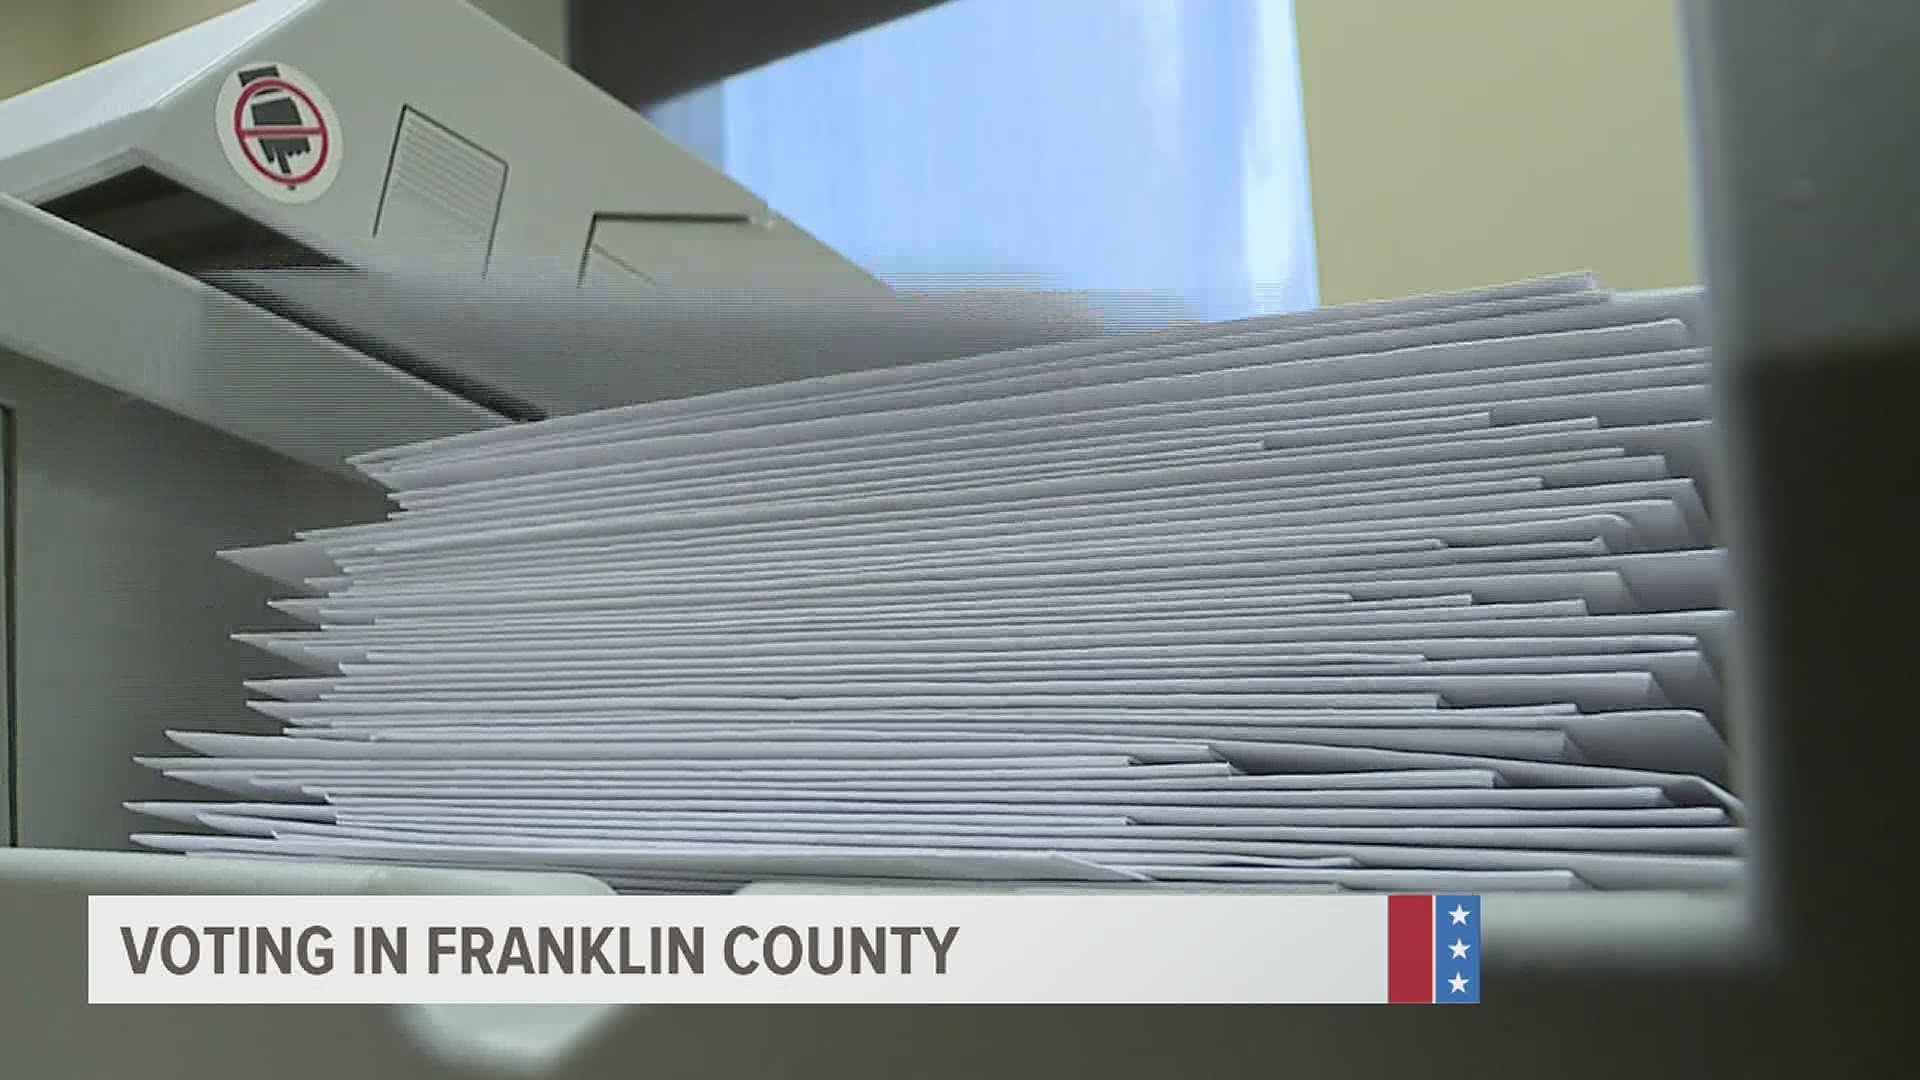 FOX43 explains the top 3 things elections officials want people voting in Franklin county need to know